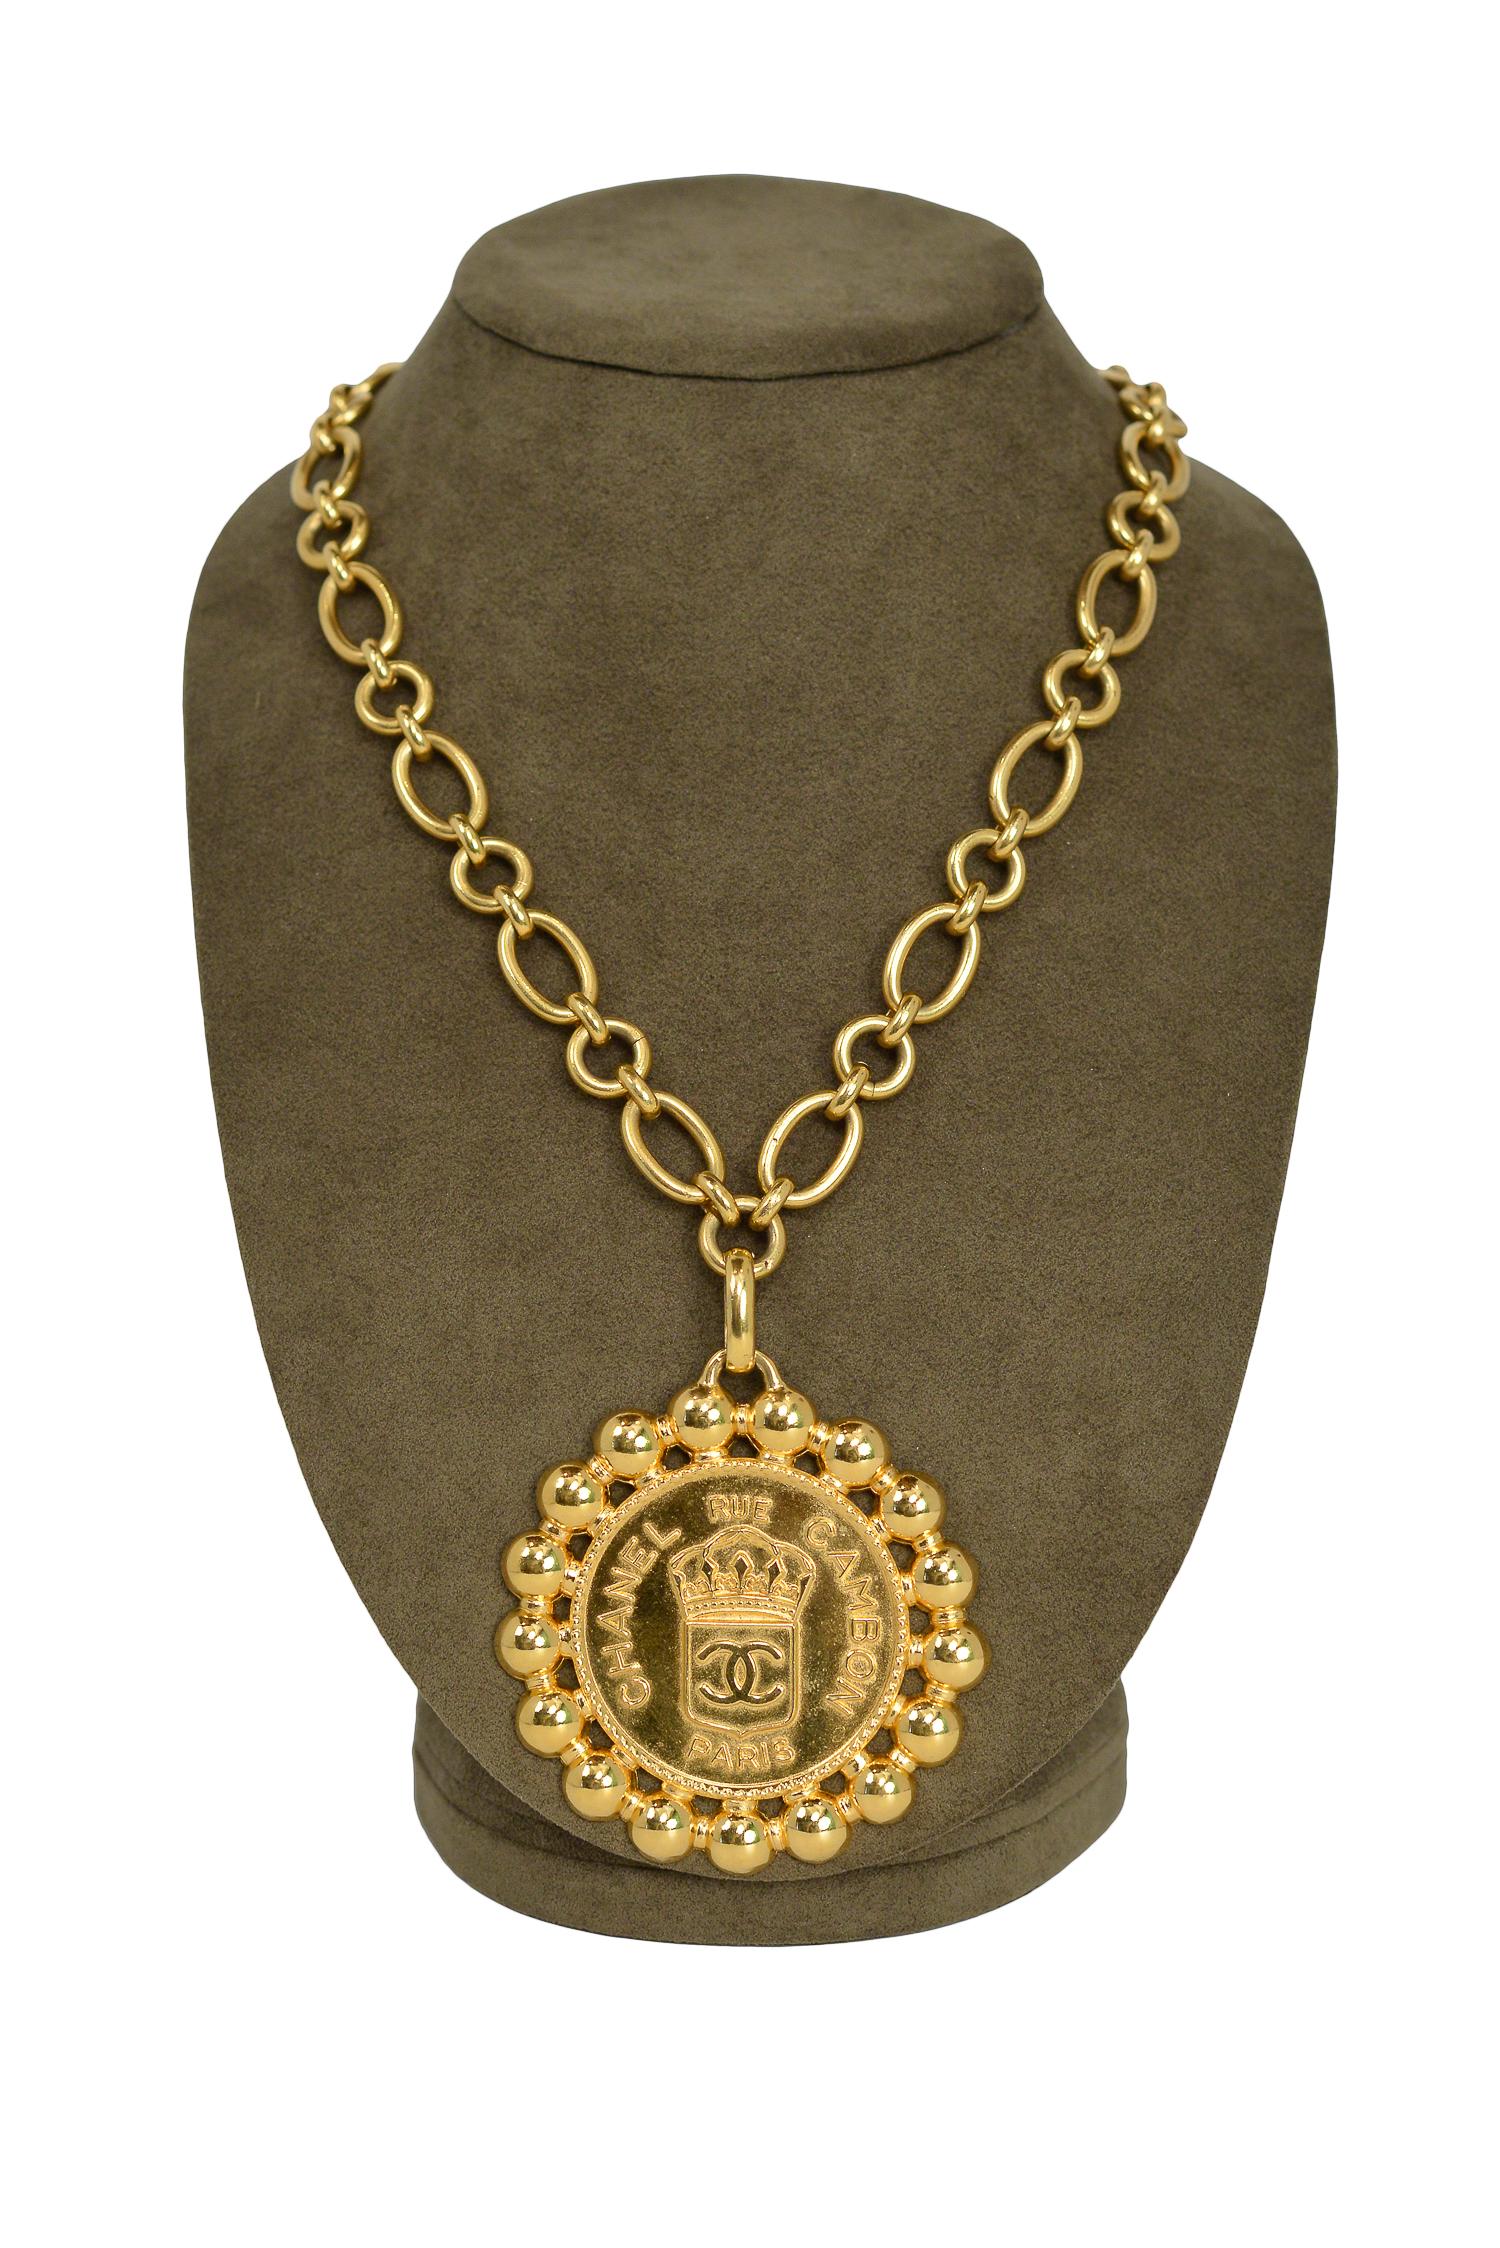 Vintage Chanel 1990s gold tone chain necklace featuring a medallion stamped with a Chanel Royal Seal and Crown.

Excellent Vintage Condition. 

Measurements:
Drop: 16